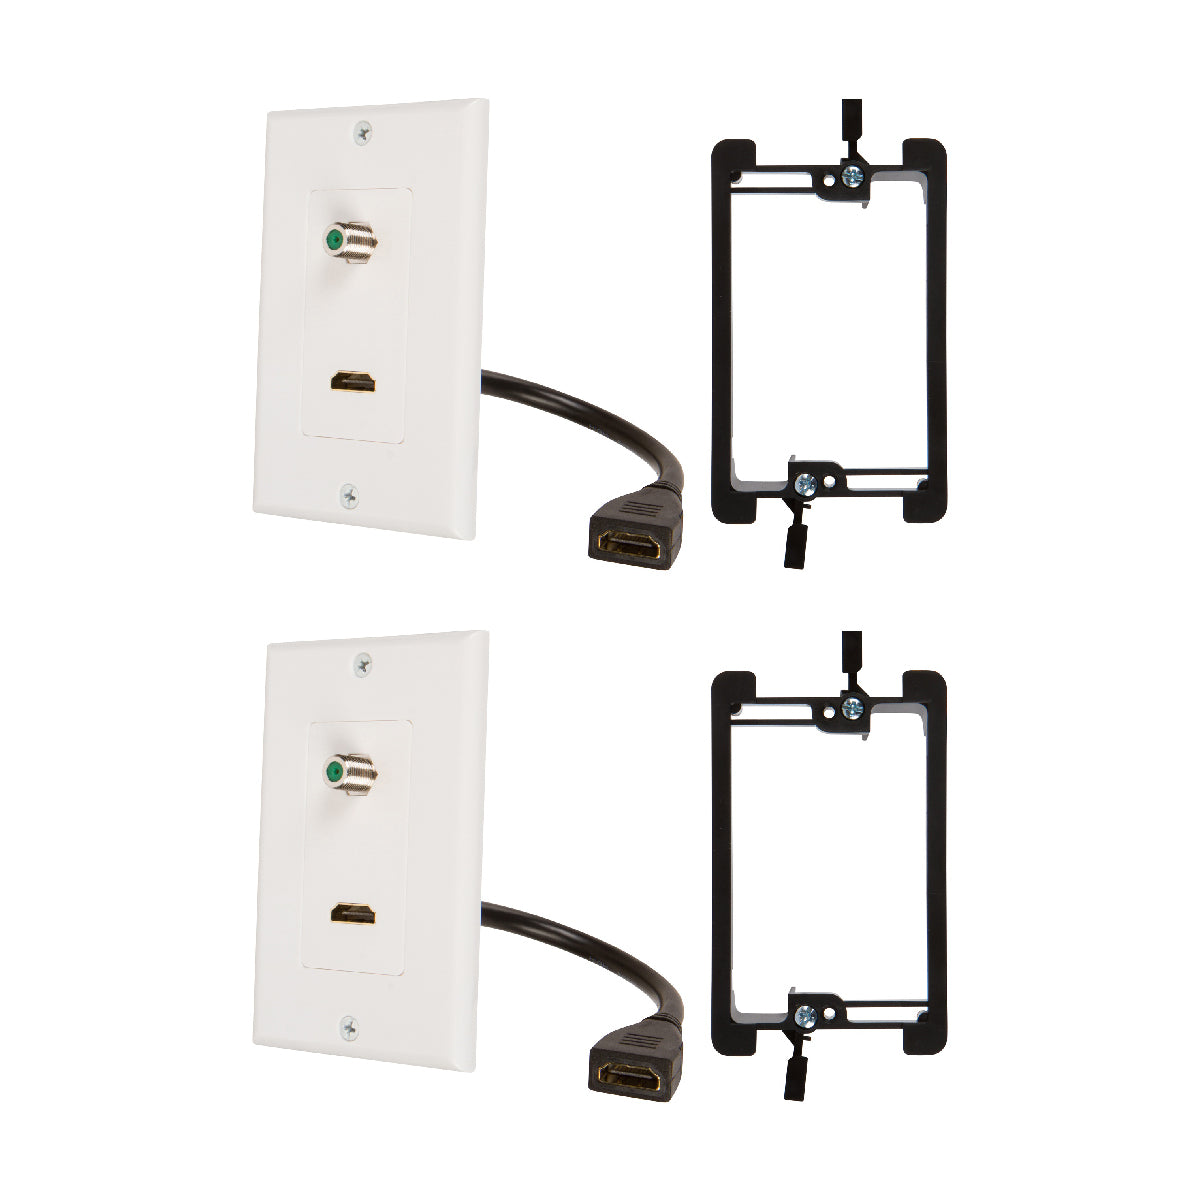 Buyer’s Point HDMI Pigtail 3GHz Coax Wall Plate with Single Gang Low Voltage Mounting Bracket Device - Milena International Inc